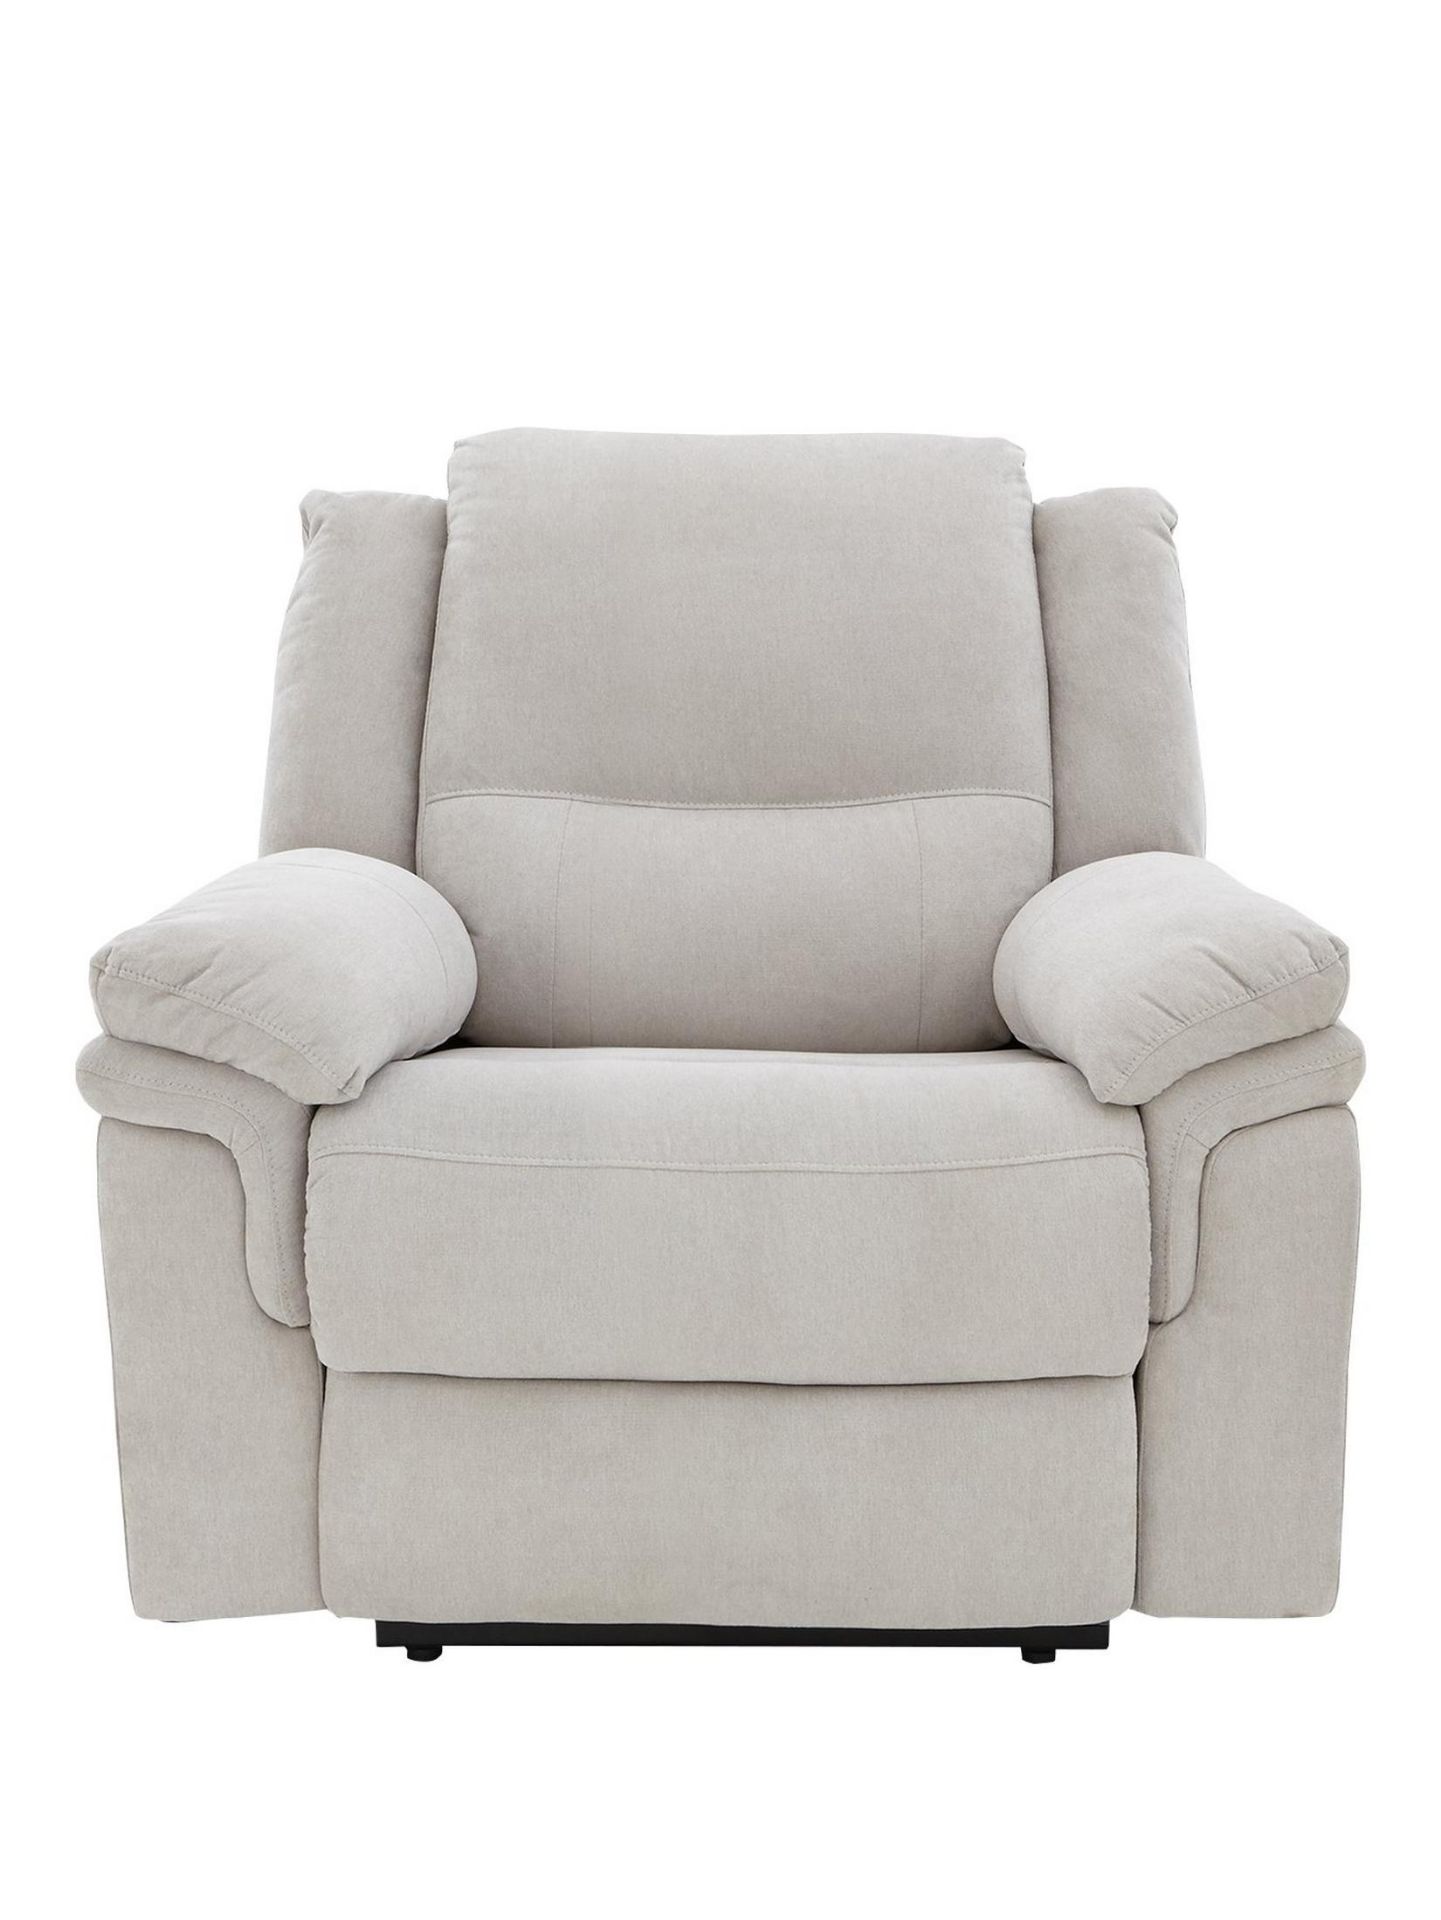 Albion Fabric Manual Recliner Chair. RPP £479.00. Irresistible texture Soft and buttery, the lightly